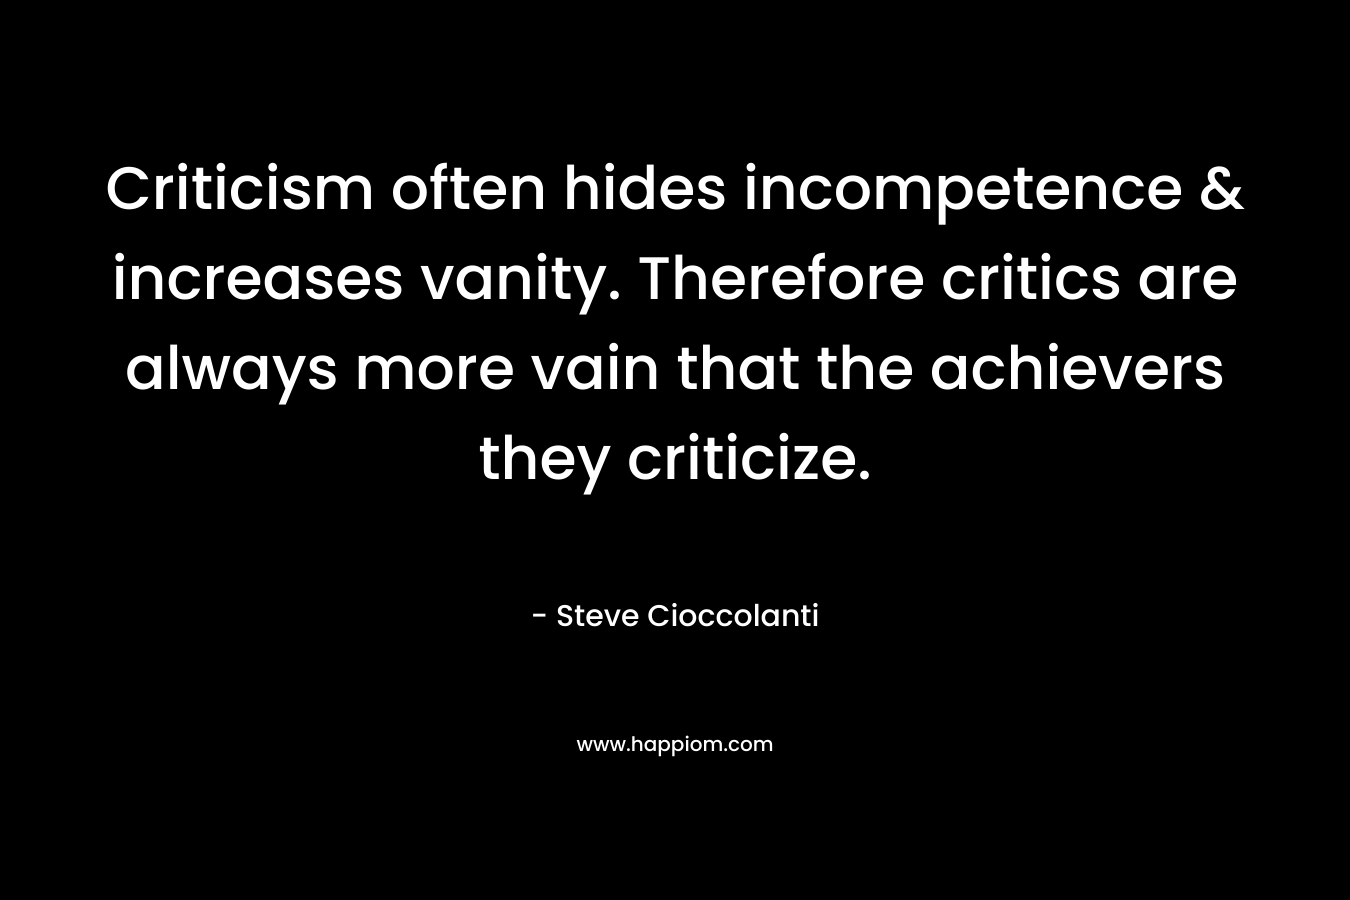 Criticism often hides incompetence & increases vanity. Therefore critics are always more vain that the achievers they criticize. – Steve Cioccolanti